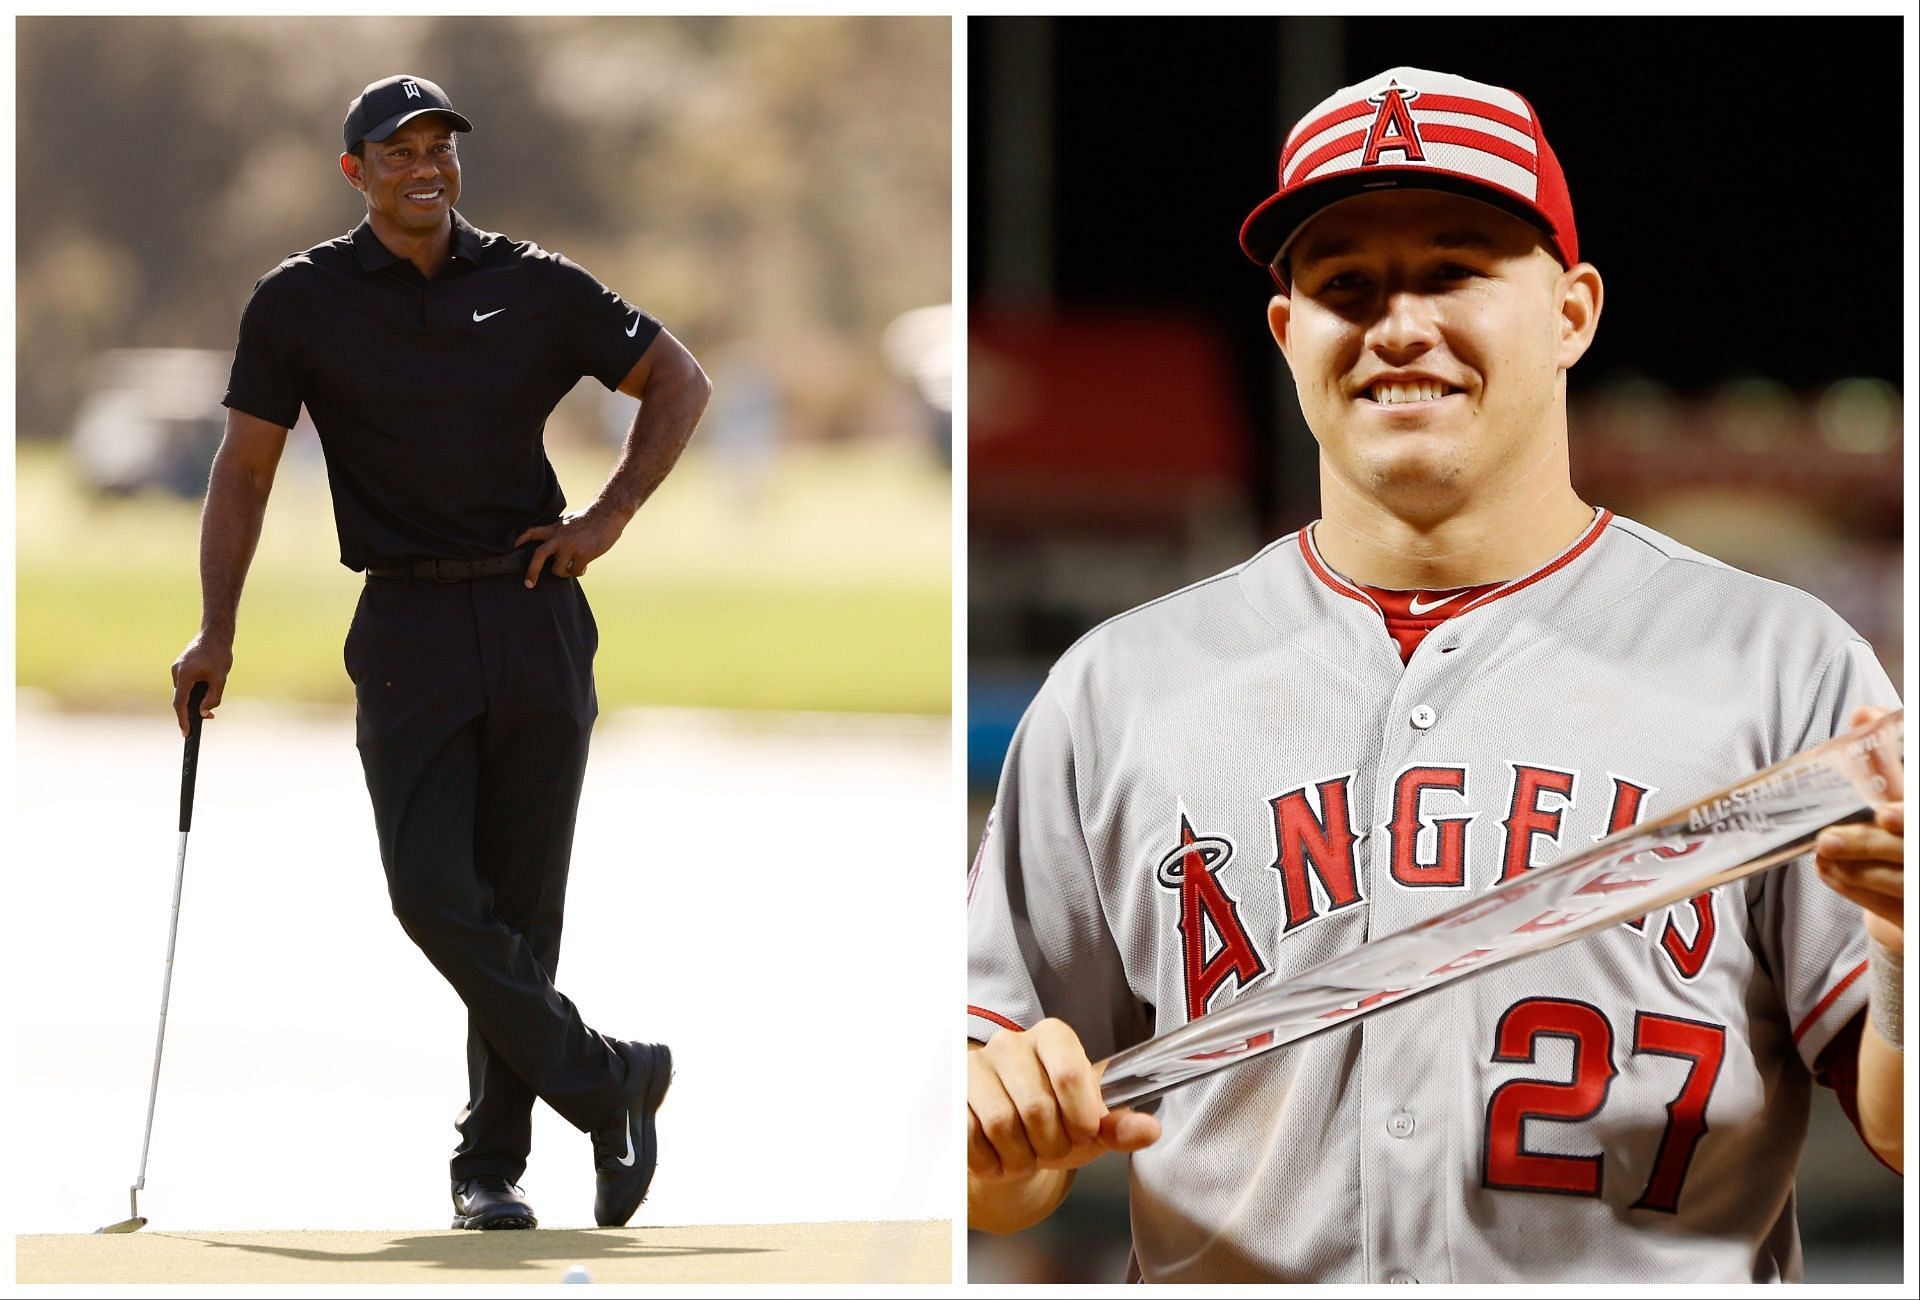 Tiger Woods teams up with Mike Trout to create New Jersey golf